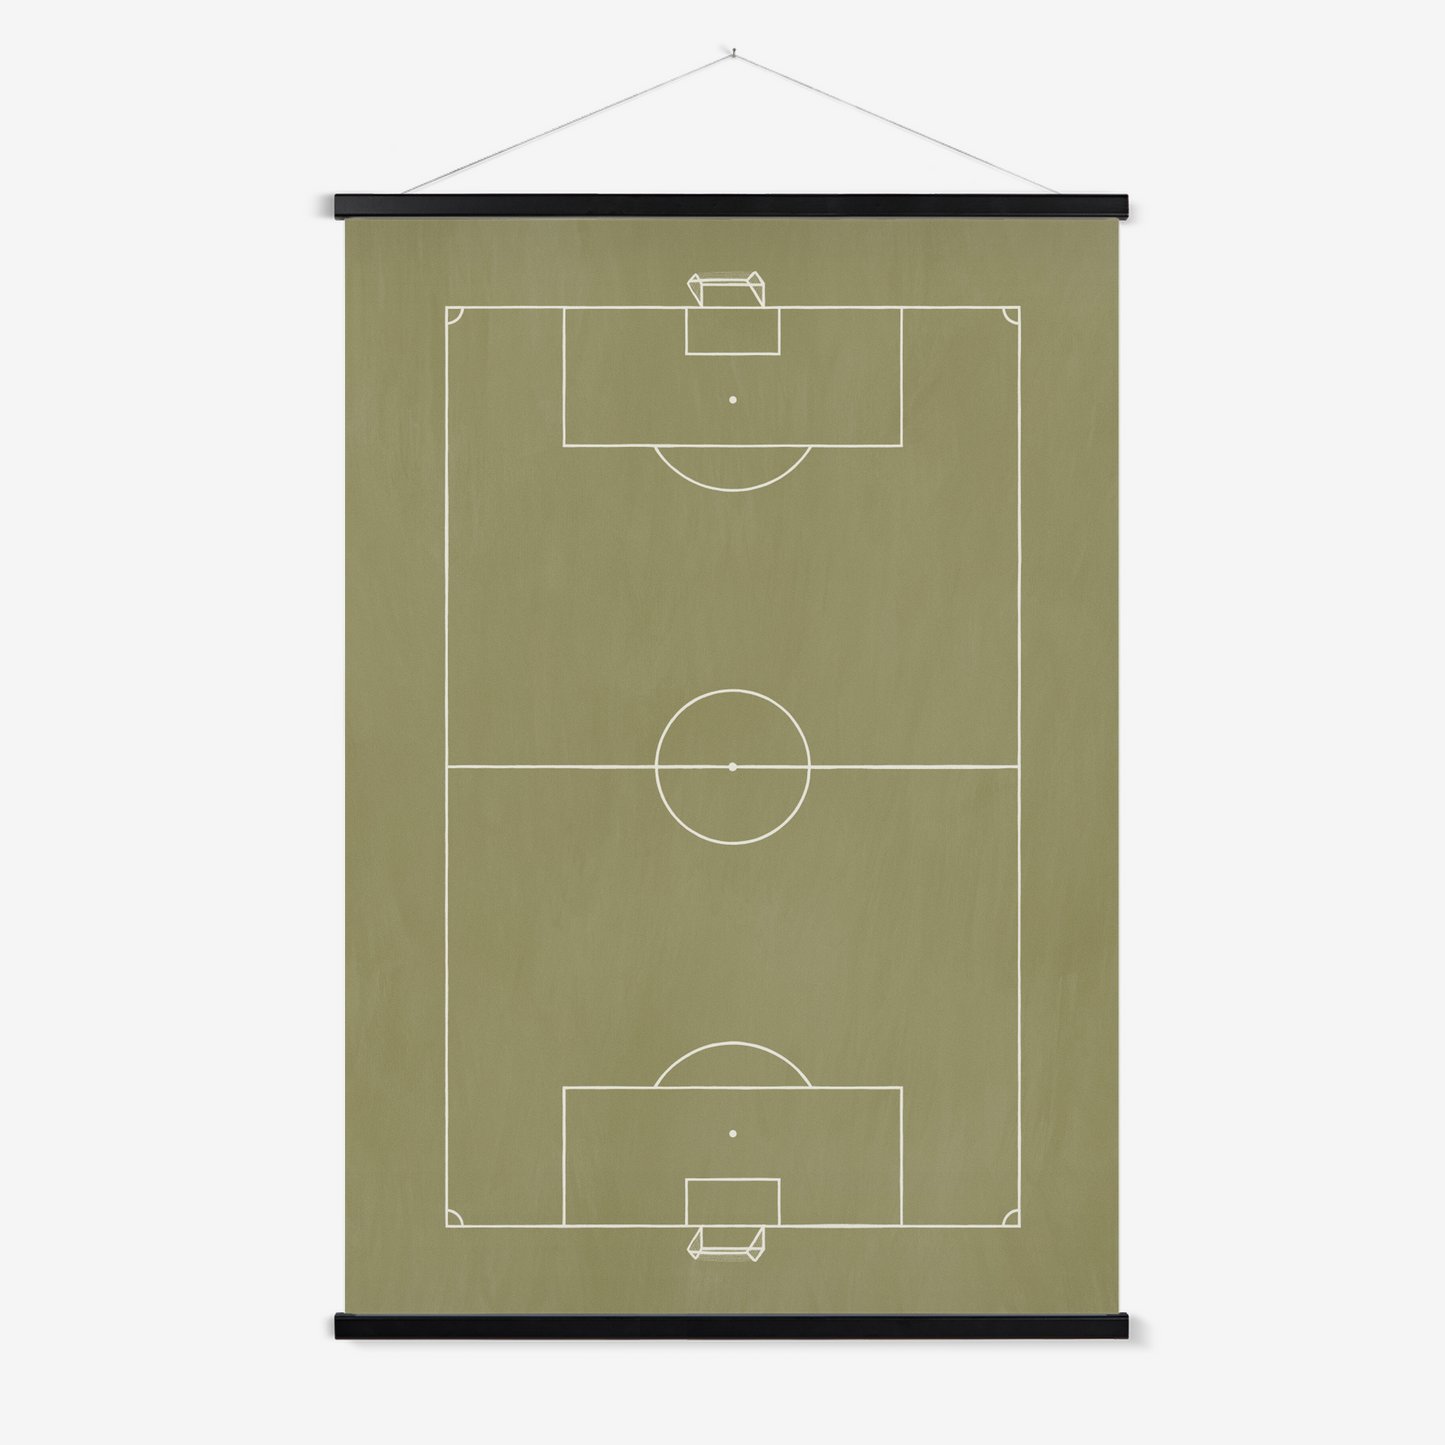 Football pitch in green / Print with Hanger